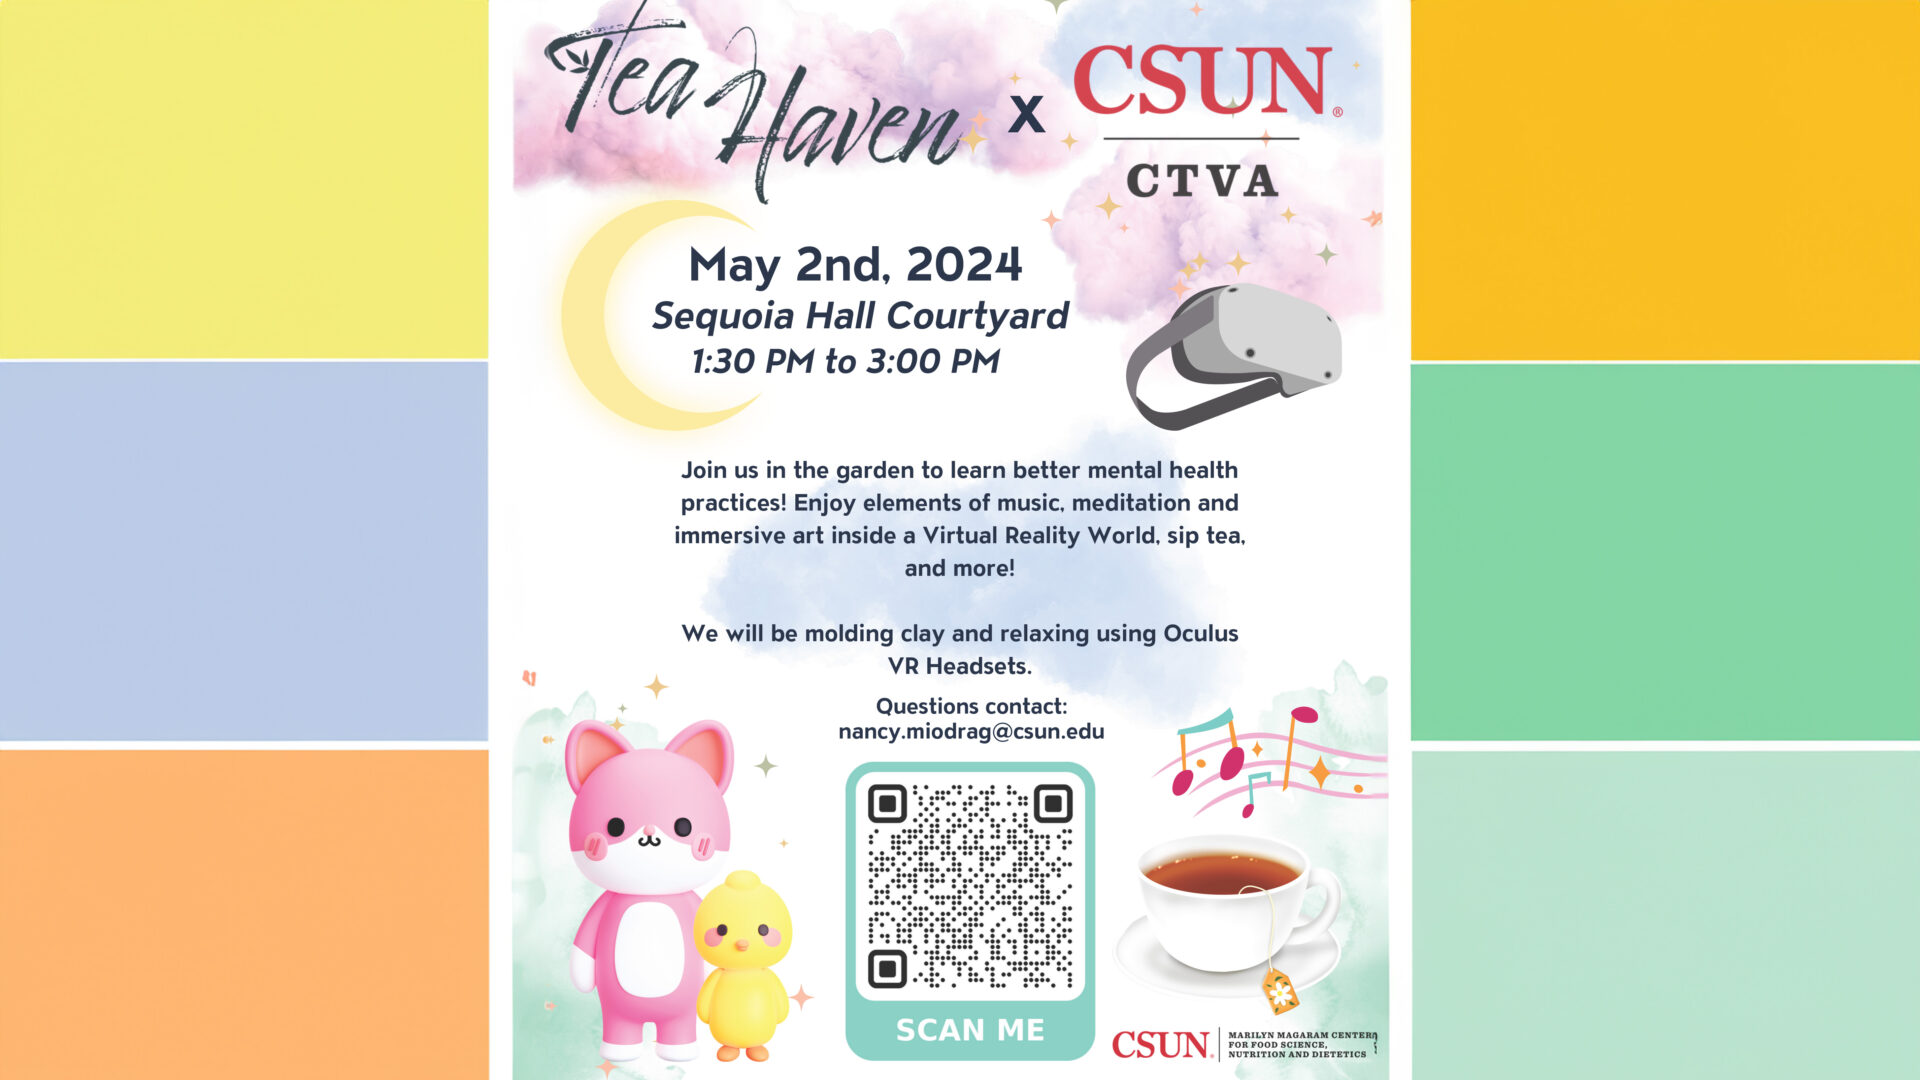 Tea Haven x CTVA event flyer showcasing a variety of teas and serene ambiance. Discover the perfect blend of relaxation and flavor at event on May 2nd from 1.30 pm to 3.00 pm Sequoia Hall Courtyard